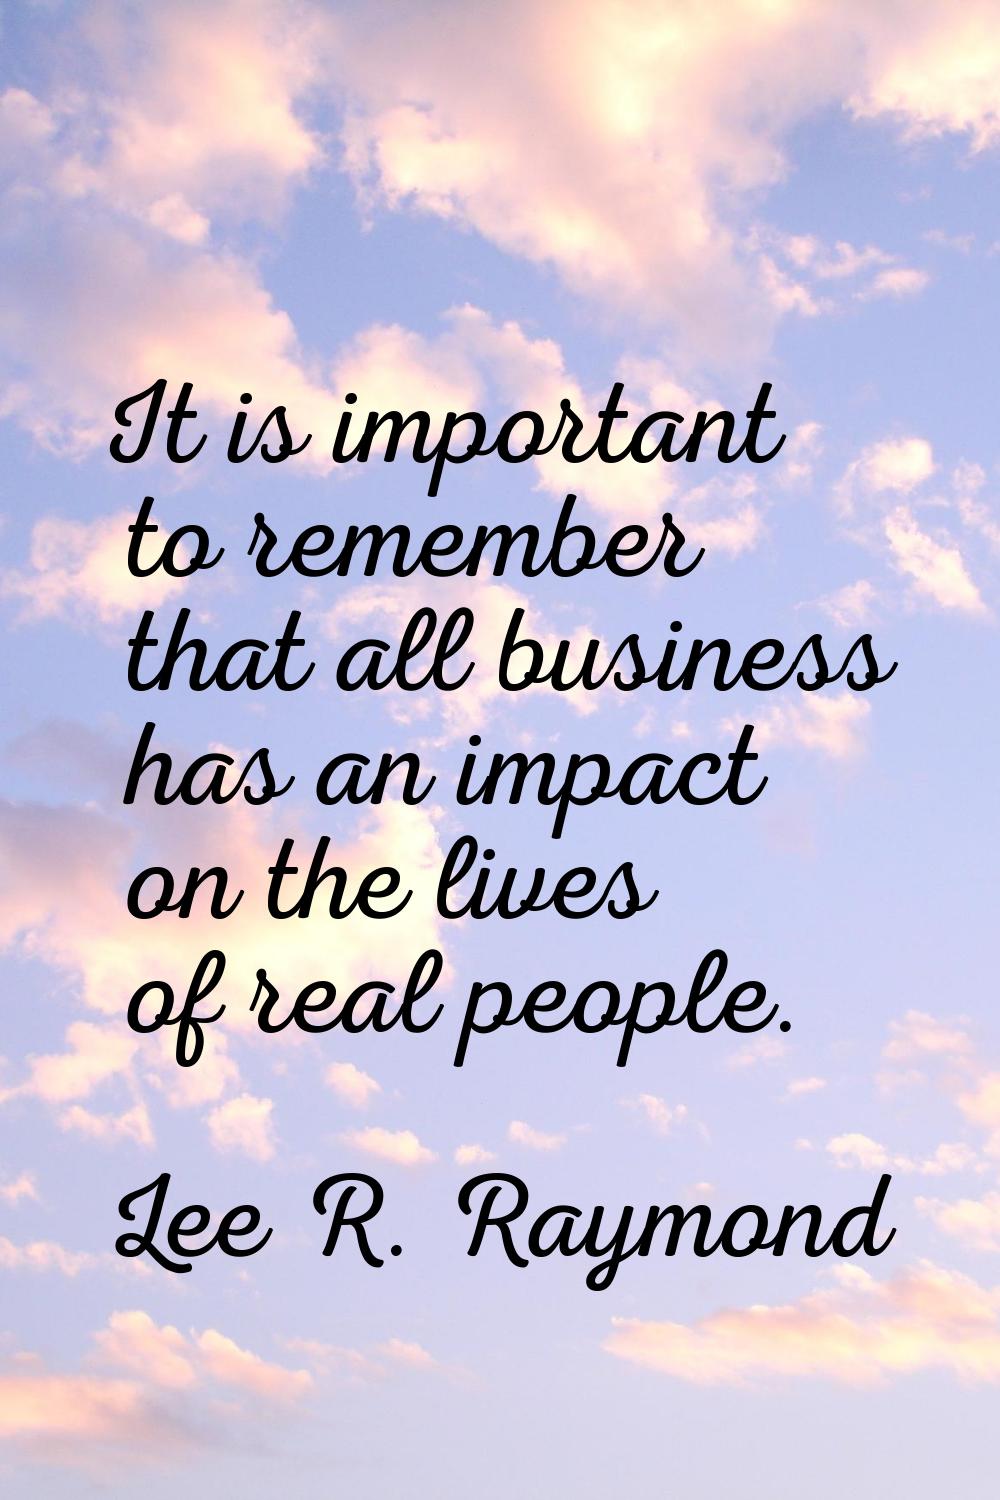 It is important to remember that all business has an impact on the lives of real people.